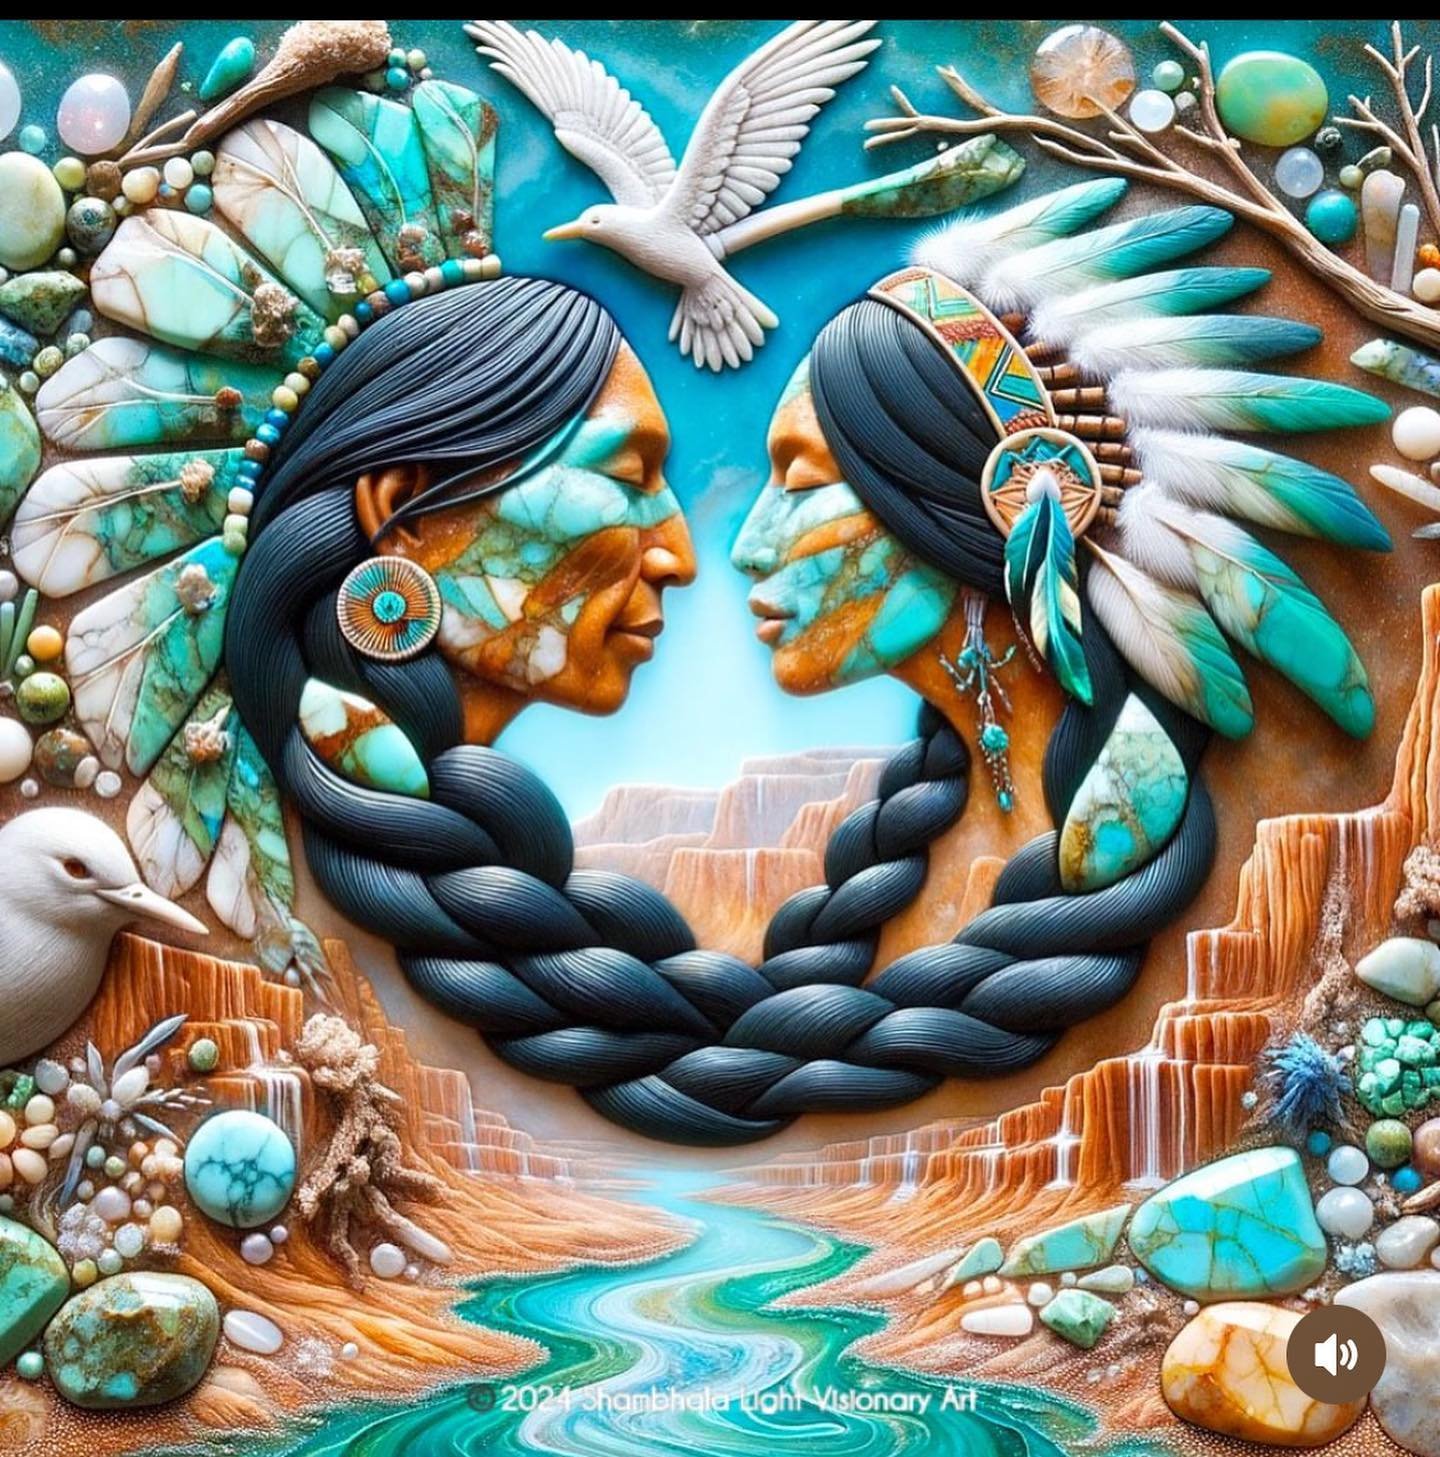 A Prayer for Love and Harmony 🕊️🌙🌈✨🕯️

Great Spirit, who sings through the winds and dances in the heartbeat of all creation,
We come to you with open hearts and lifted spirits, Seeking the harmony that binds the sky to the earth, The same harmon